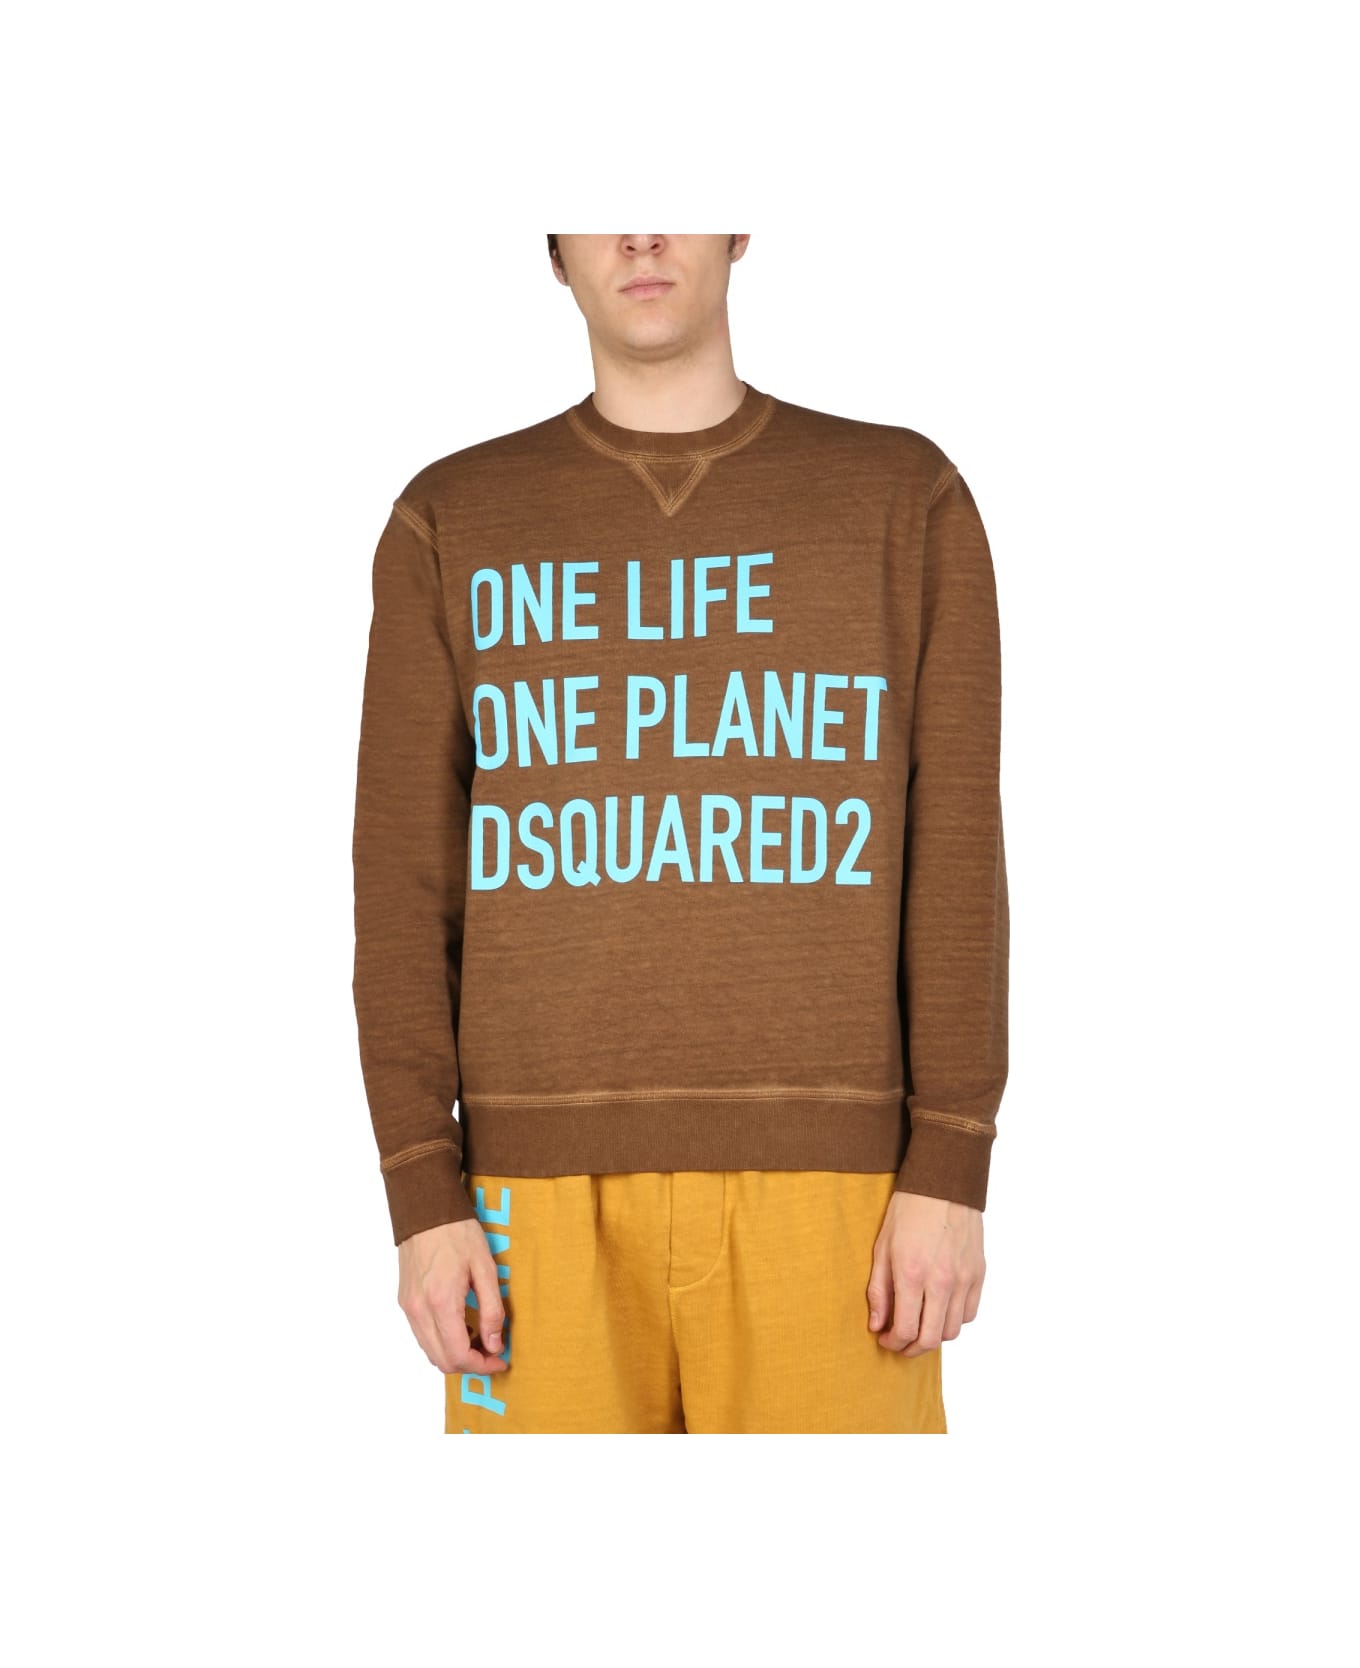 Dsquared2 "one Life One Planet" Sweatshirt - BROWN